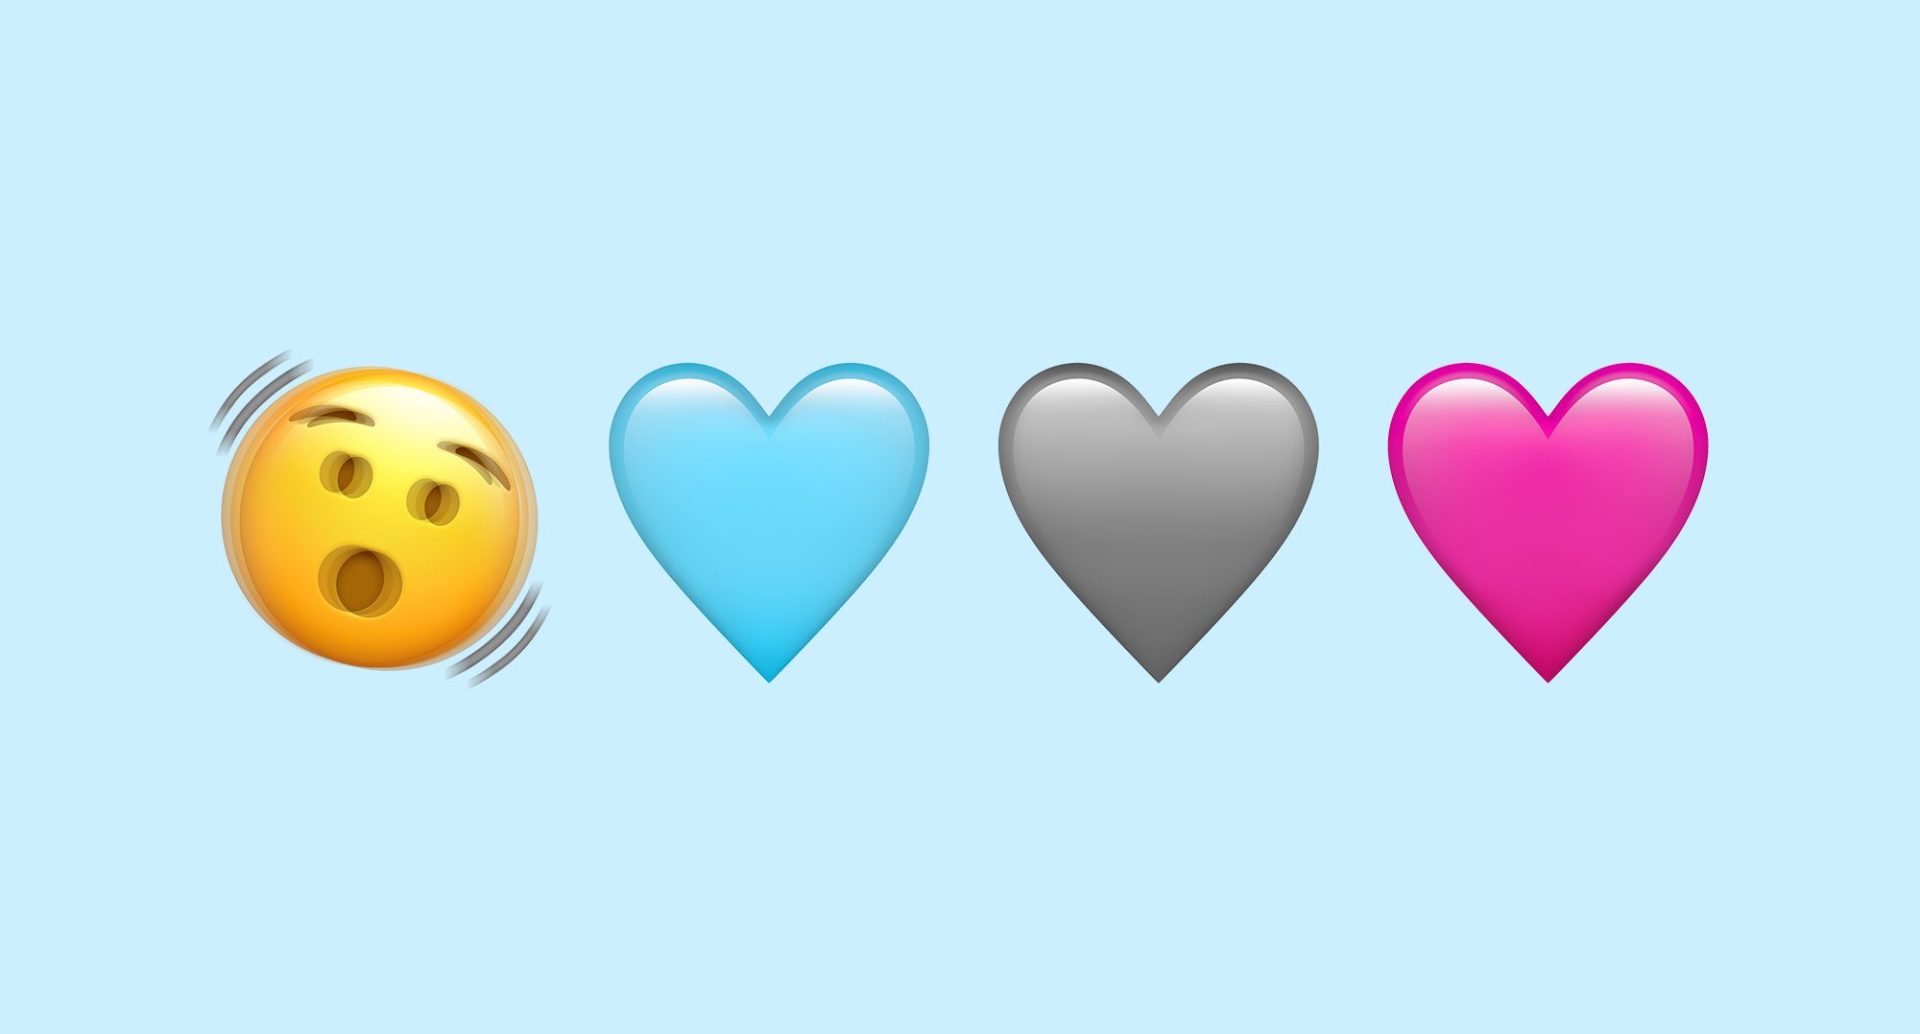 Emoji meanings - You've been using the sassy girl in the pink jumper wrong